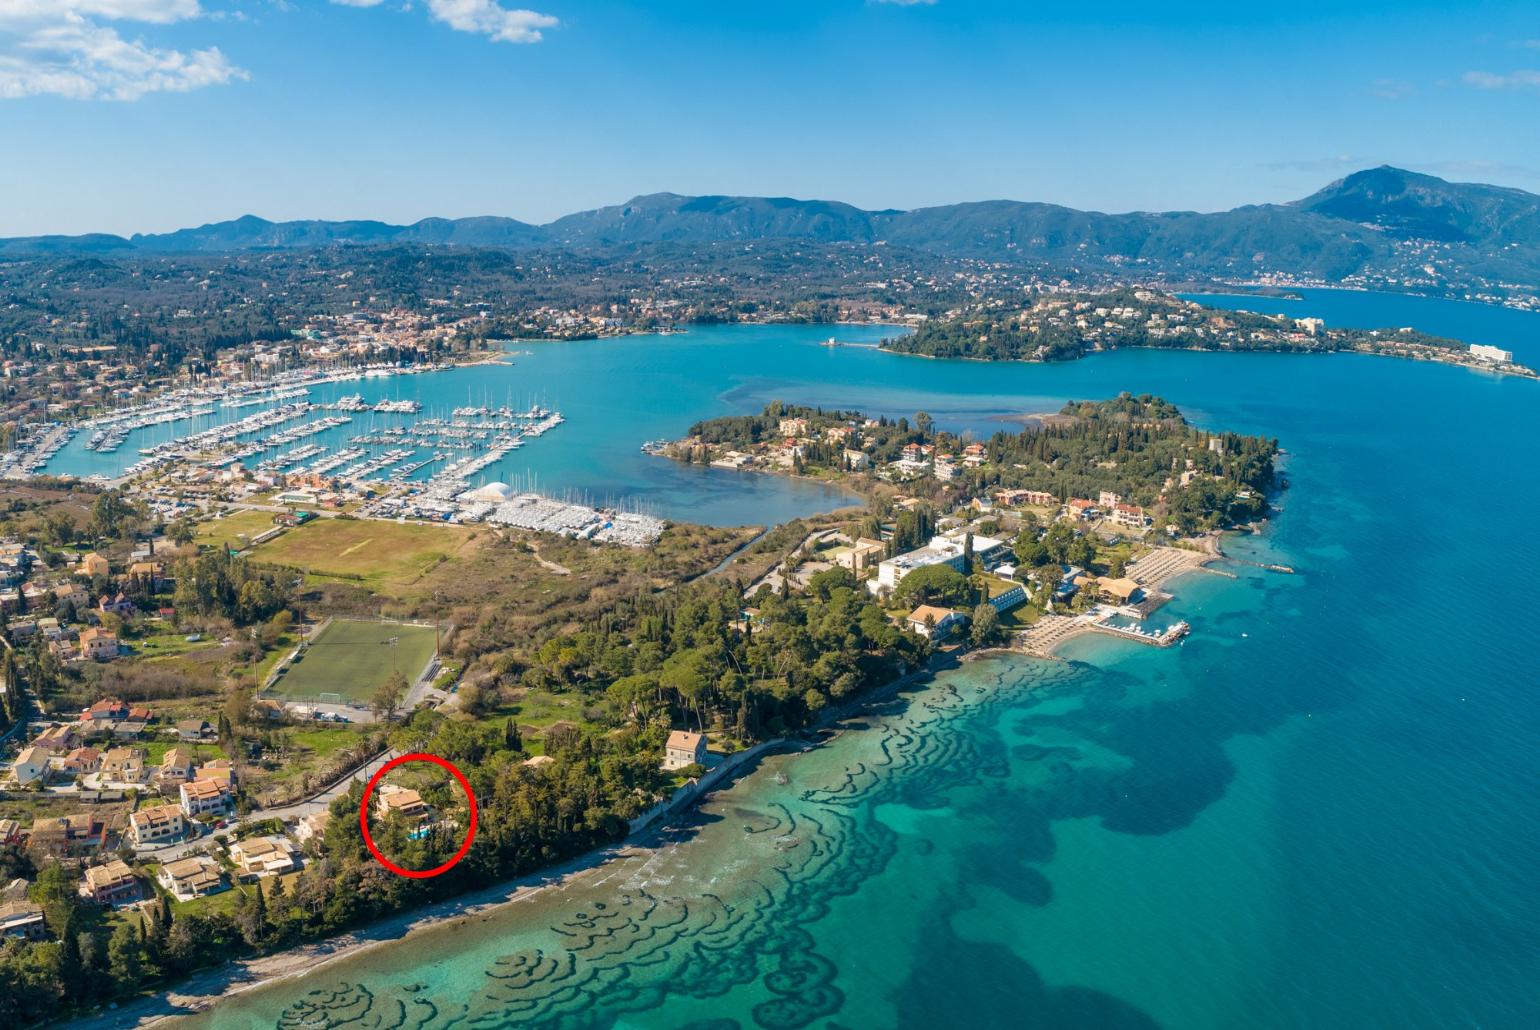 Aerial view showing location of Villa Durrell